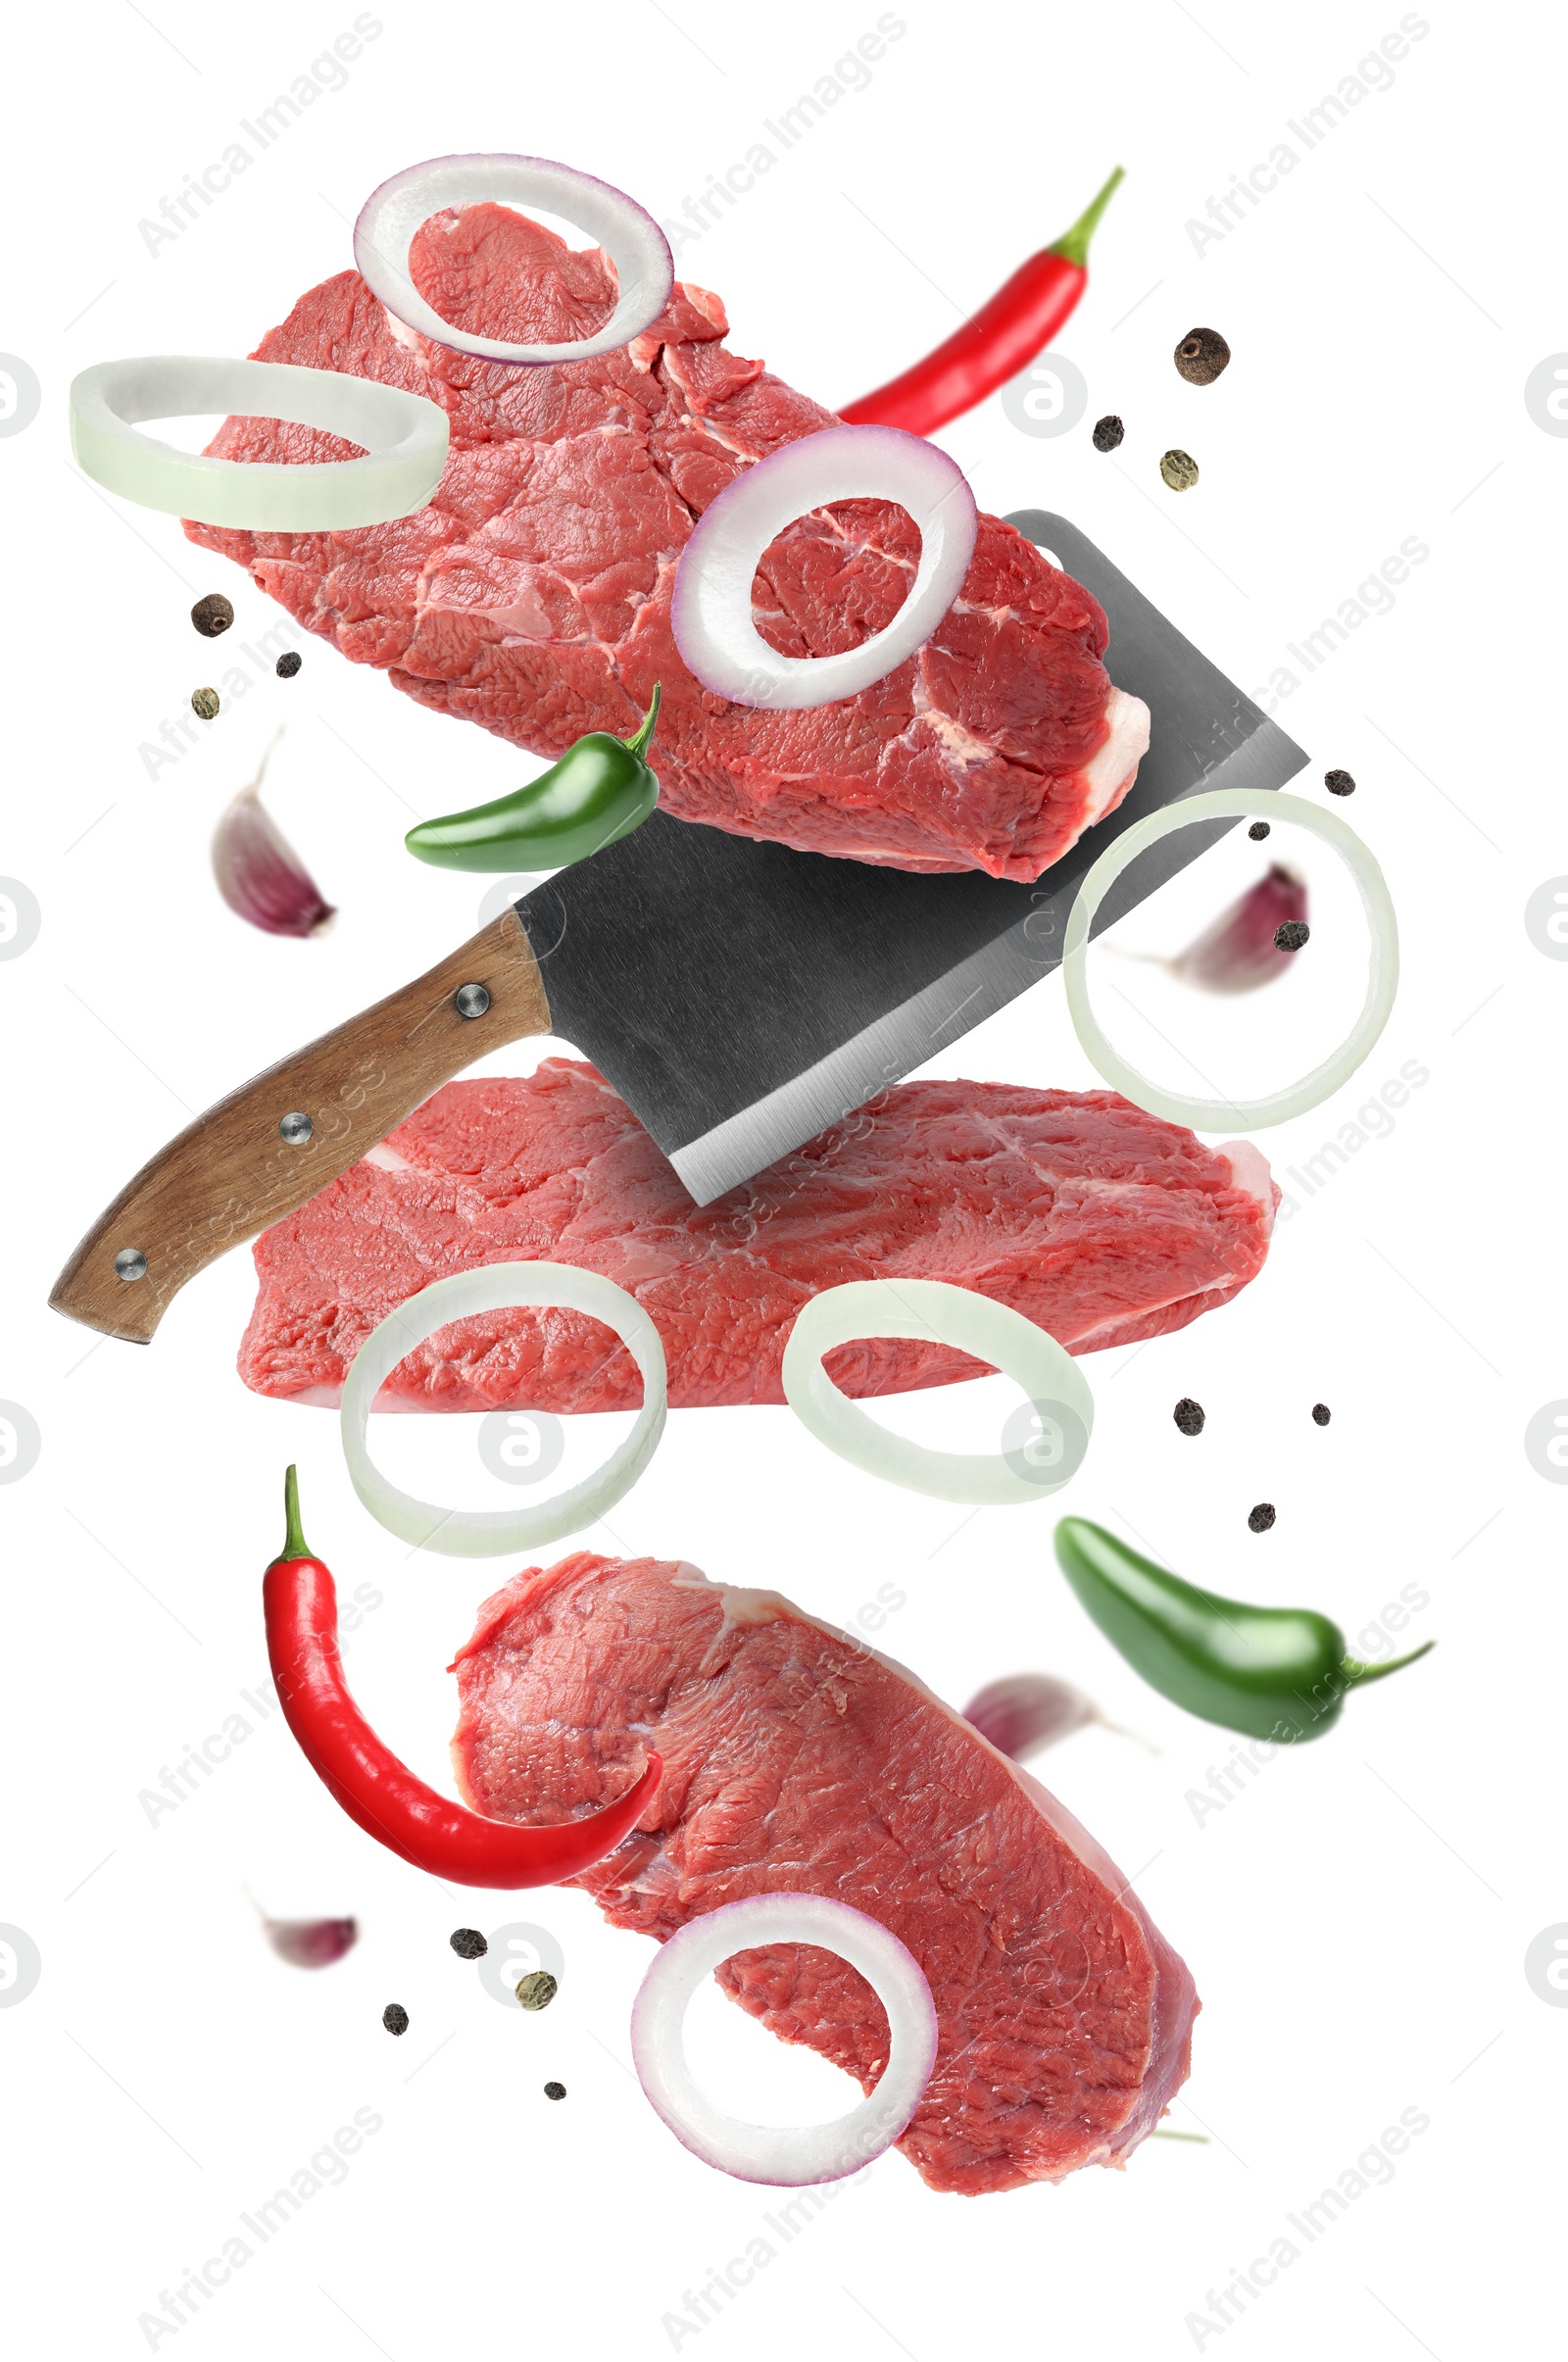 Image of Beef meat, different spices and cleaver knife falling on white background